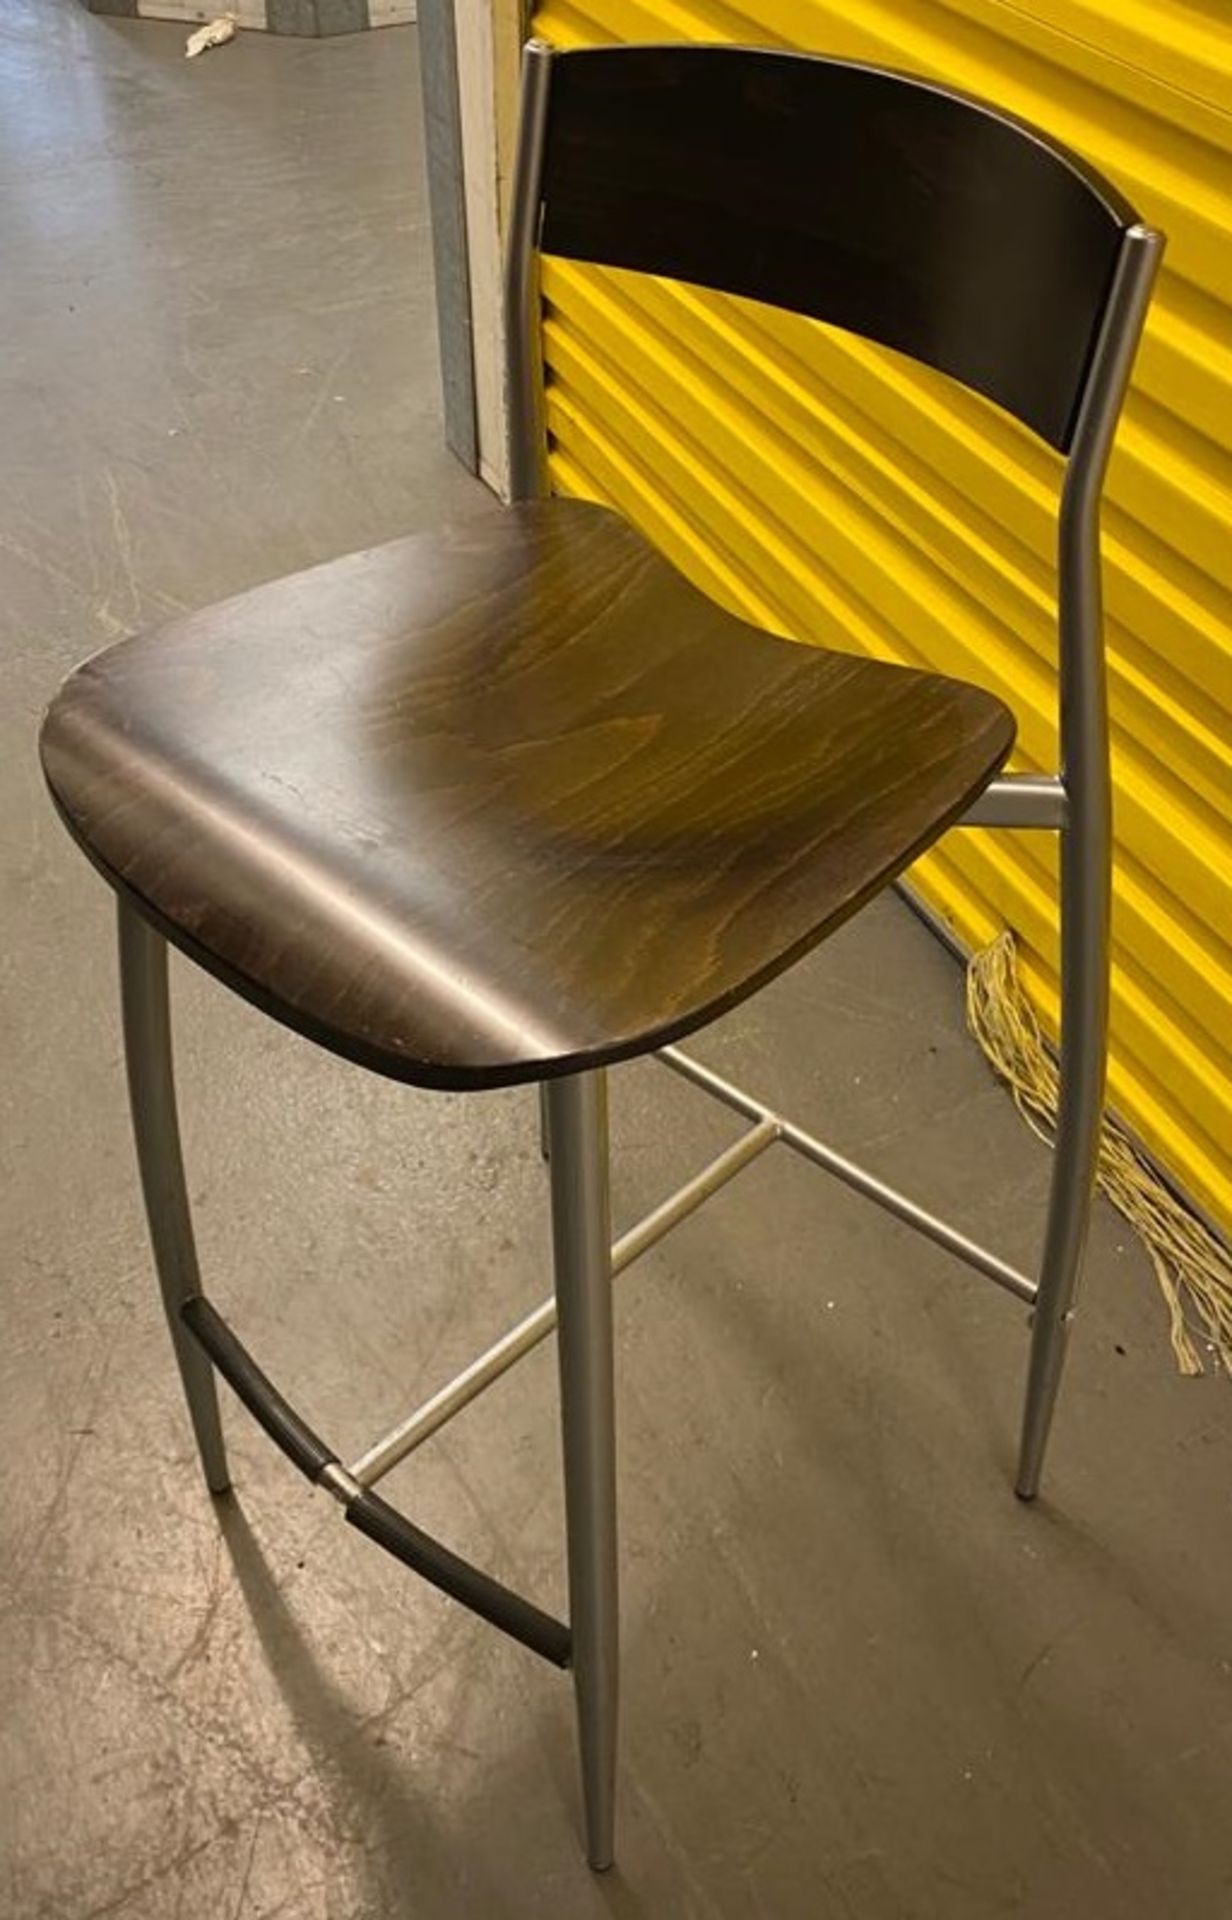 4 x Altek Bar Stools - Made in Italy - Supplied in Dark Wood - CL667 - Location: Brighton, Sussex, - Image 6 of 9